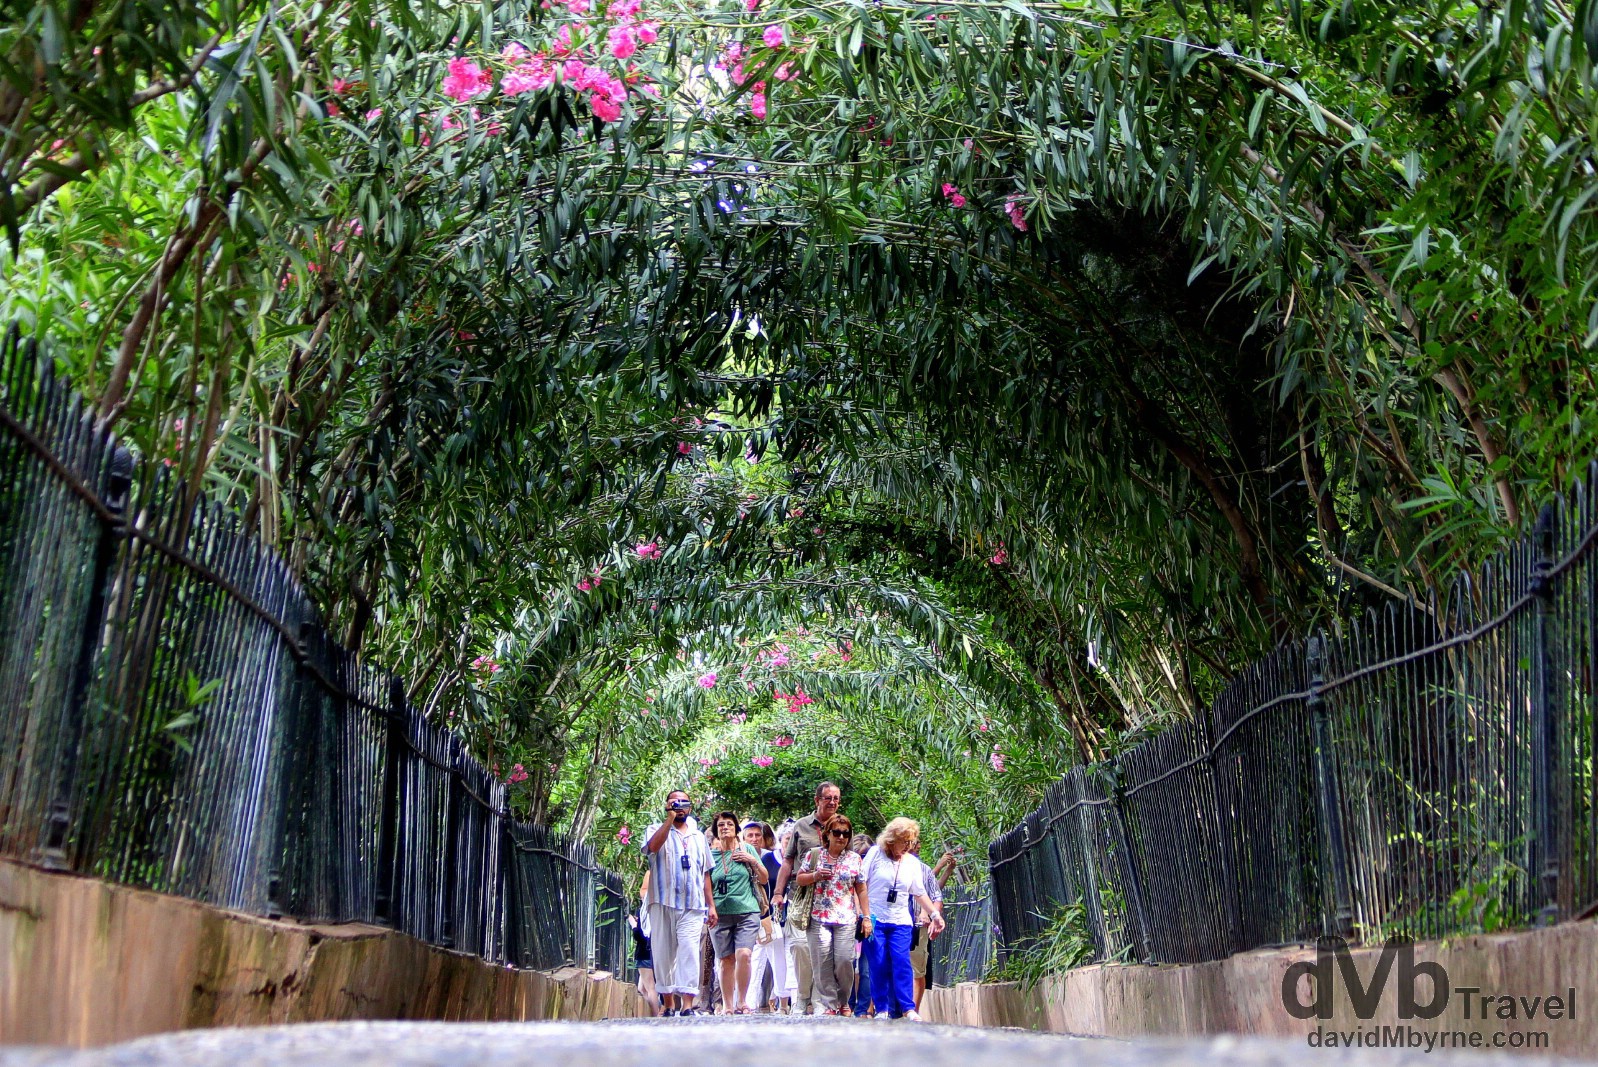 A tour group crowd walking through a rosebush tunnel in a section of the UNESCO-listed Generalife gardens in Granada, Andalusia, Spain. June 11th, 2014.